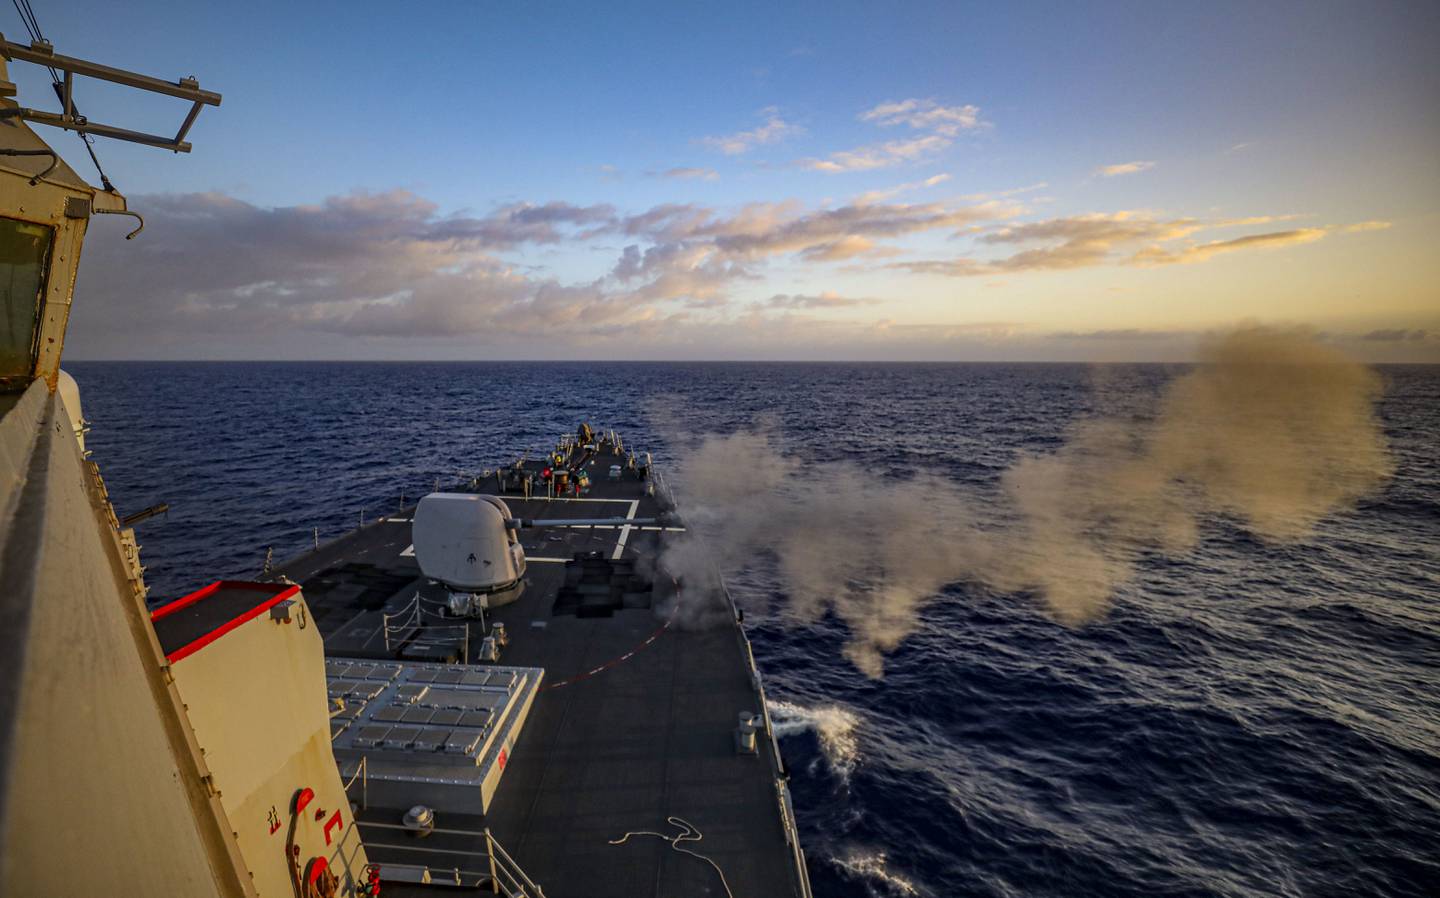 Guided-missile destroyer Benfold conducts a live-fire gunnery exercise as part of Keen Sword in the Philippine Sea, Nov. 13, 2022.